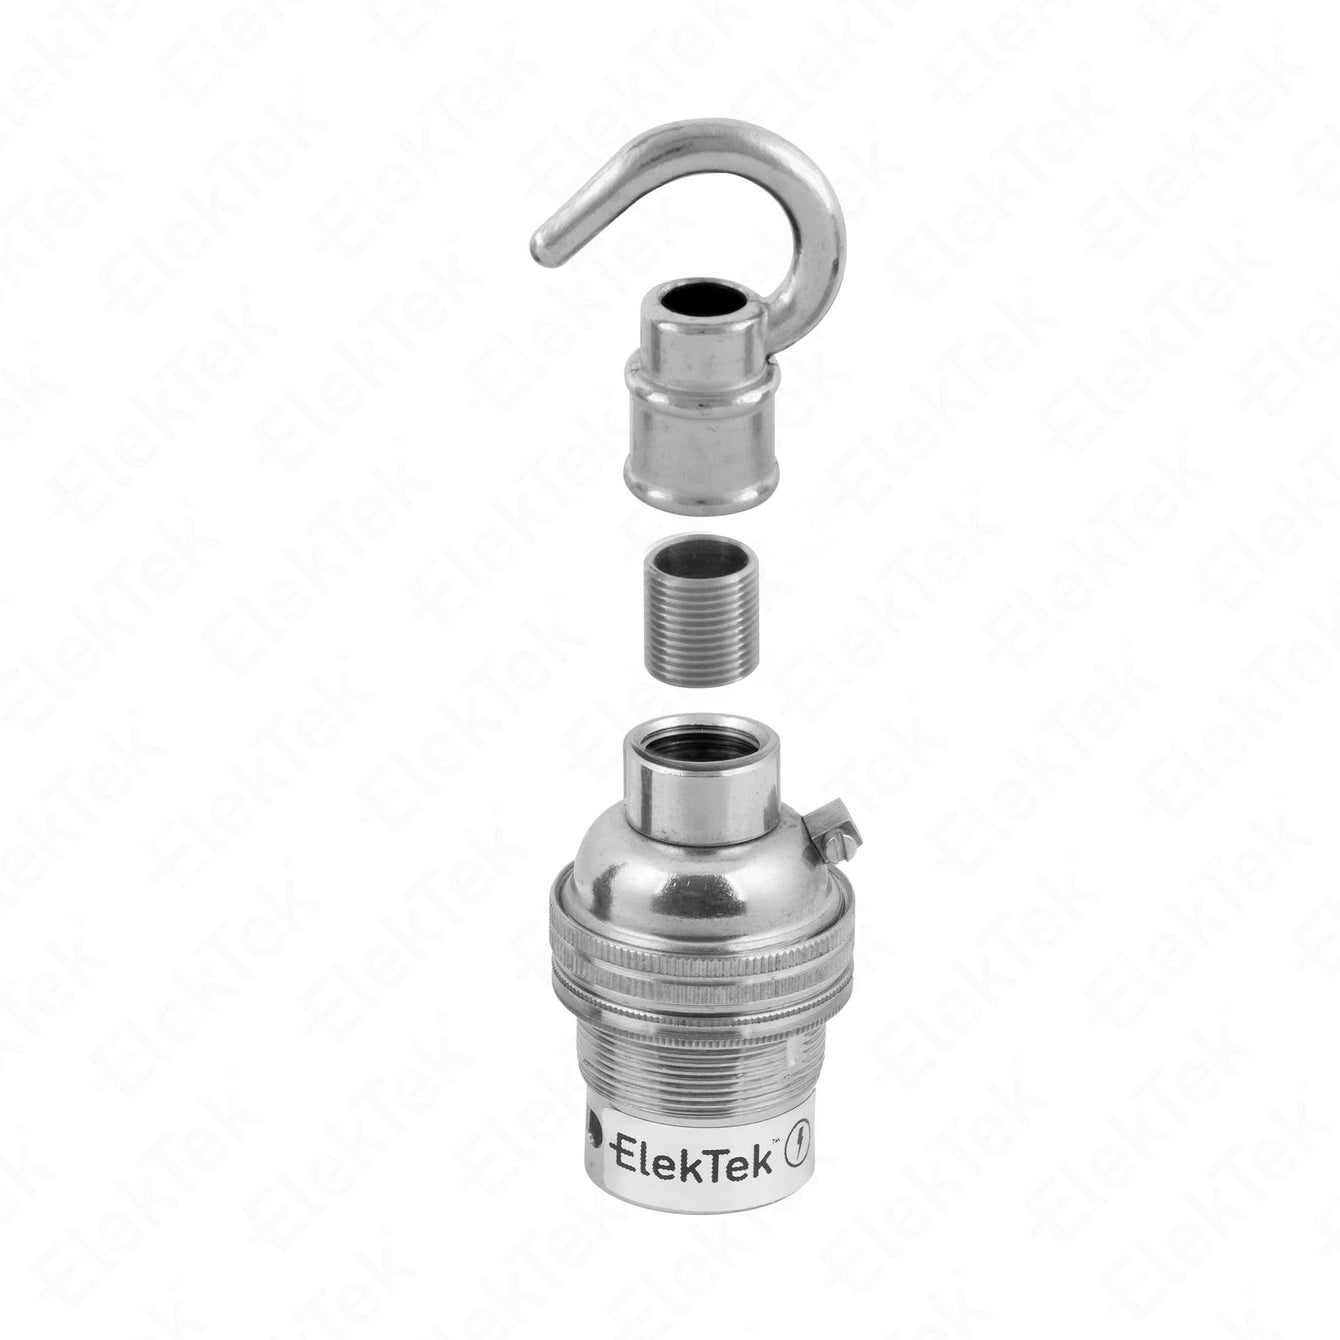 ElekTek Lamp Holder Bayonet Cap B22 Unswitched With Shade Ring and Hook Solid Brass Bronze